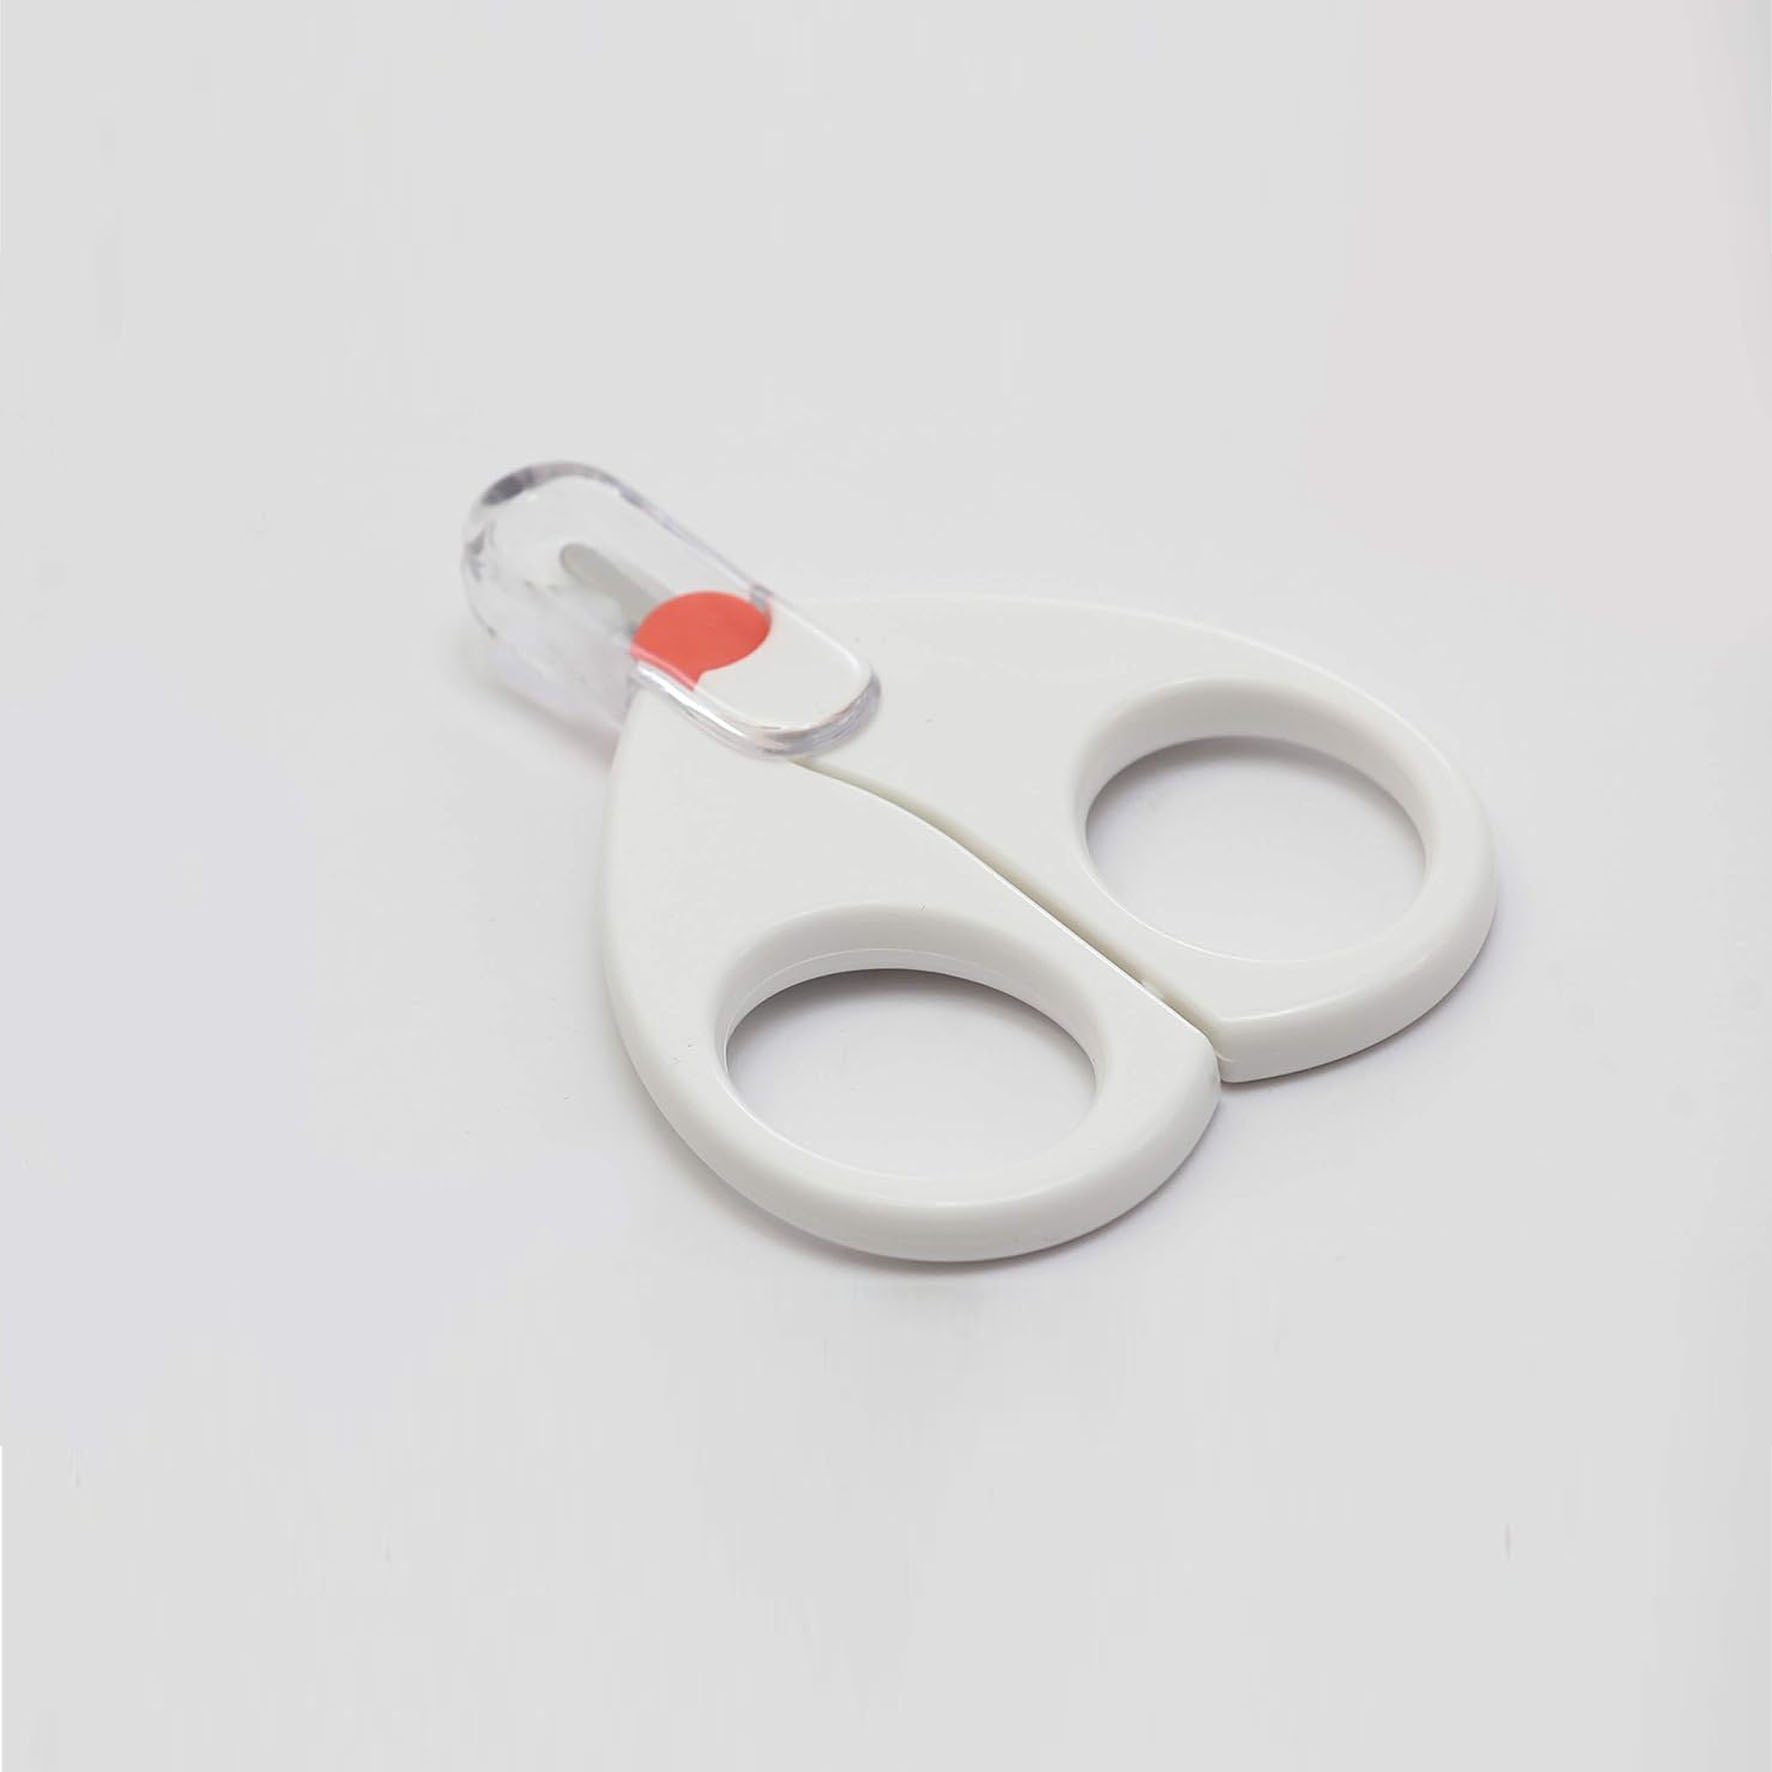 Rikang Baby Safety Scissors with Circular Cutter Head (Assorted Color)